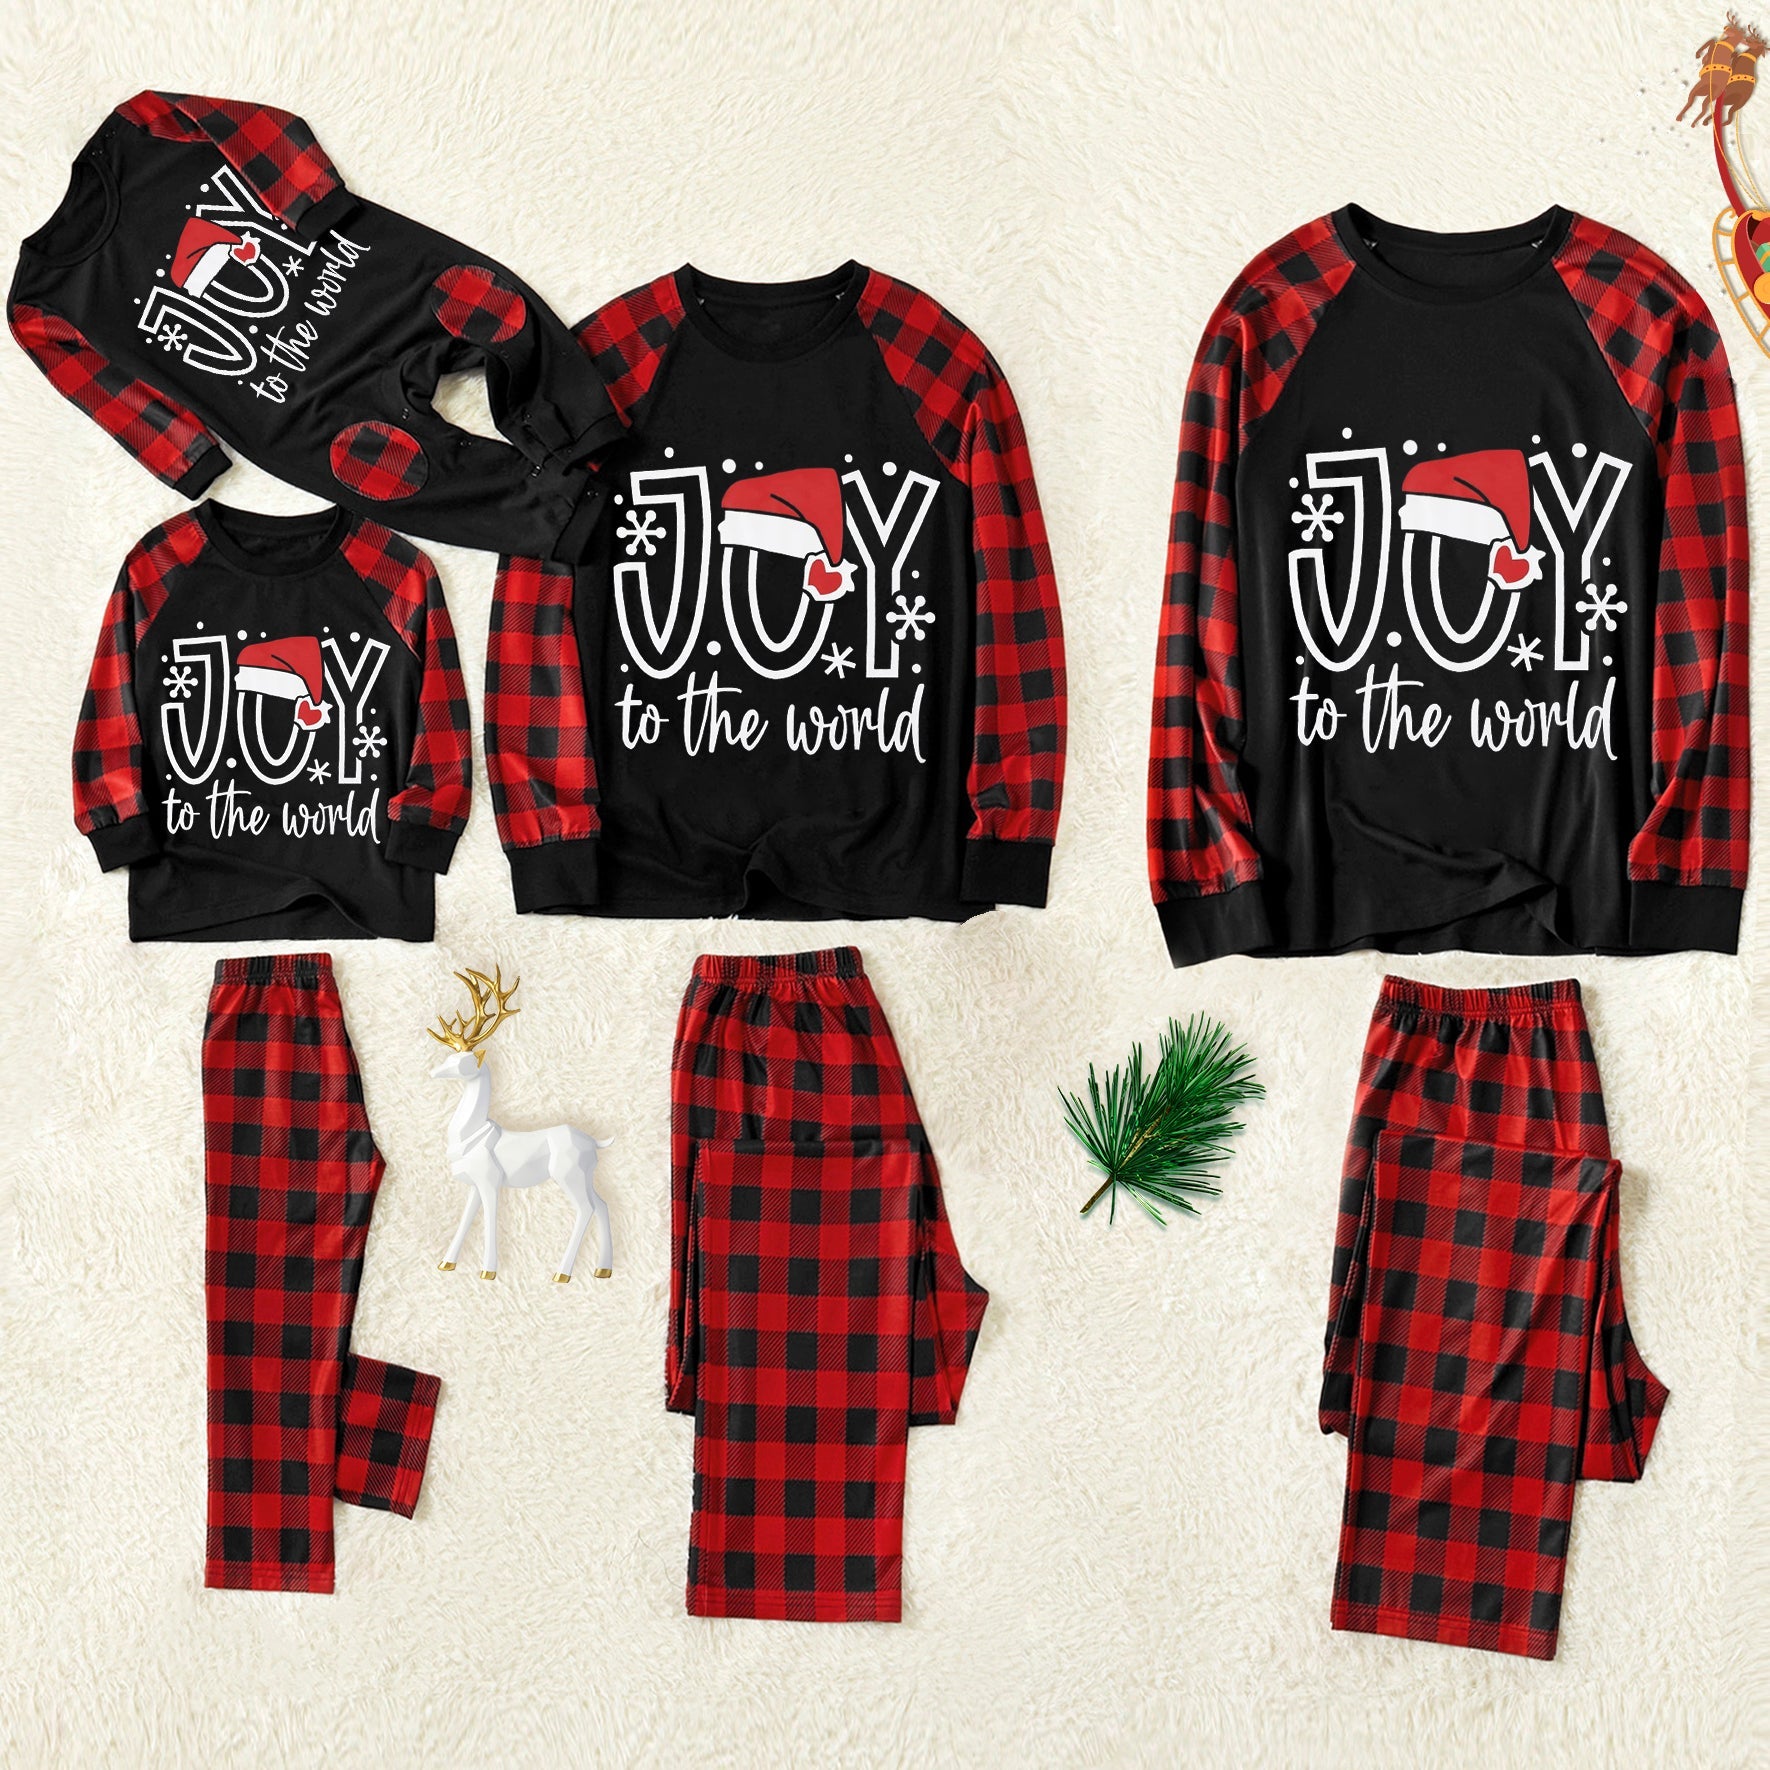 Christmas "Joy to The World" Letter Print Christmas Hat Patter Contrast Black top and Black & Red Plaid Pants Family Matching Pajamas Set With Dog Bandana